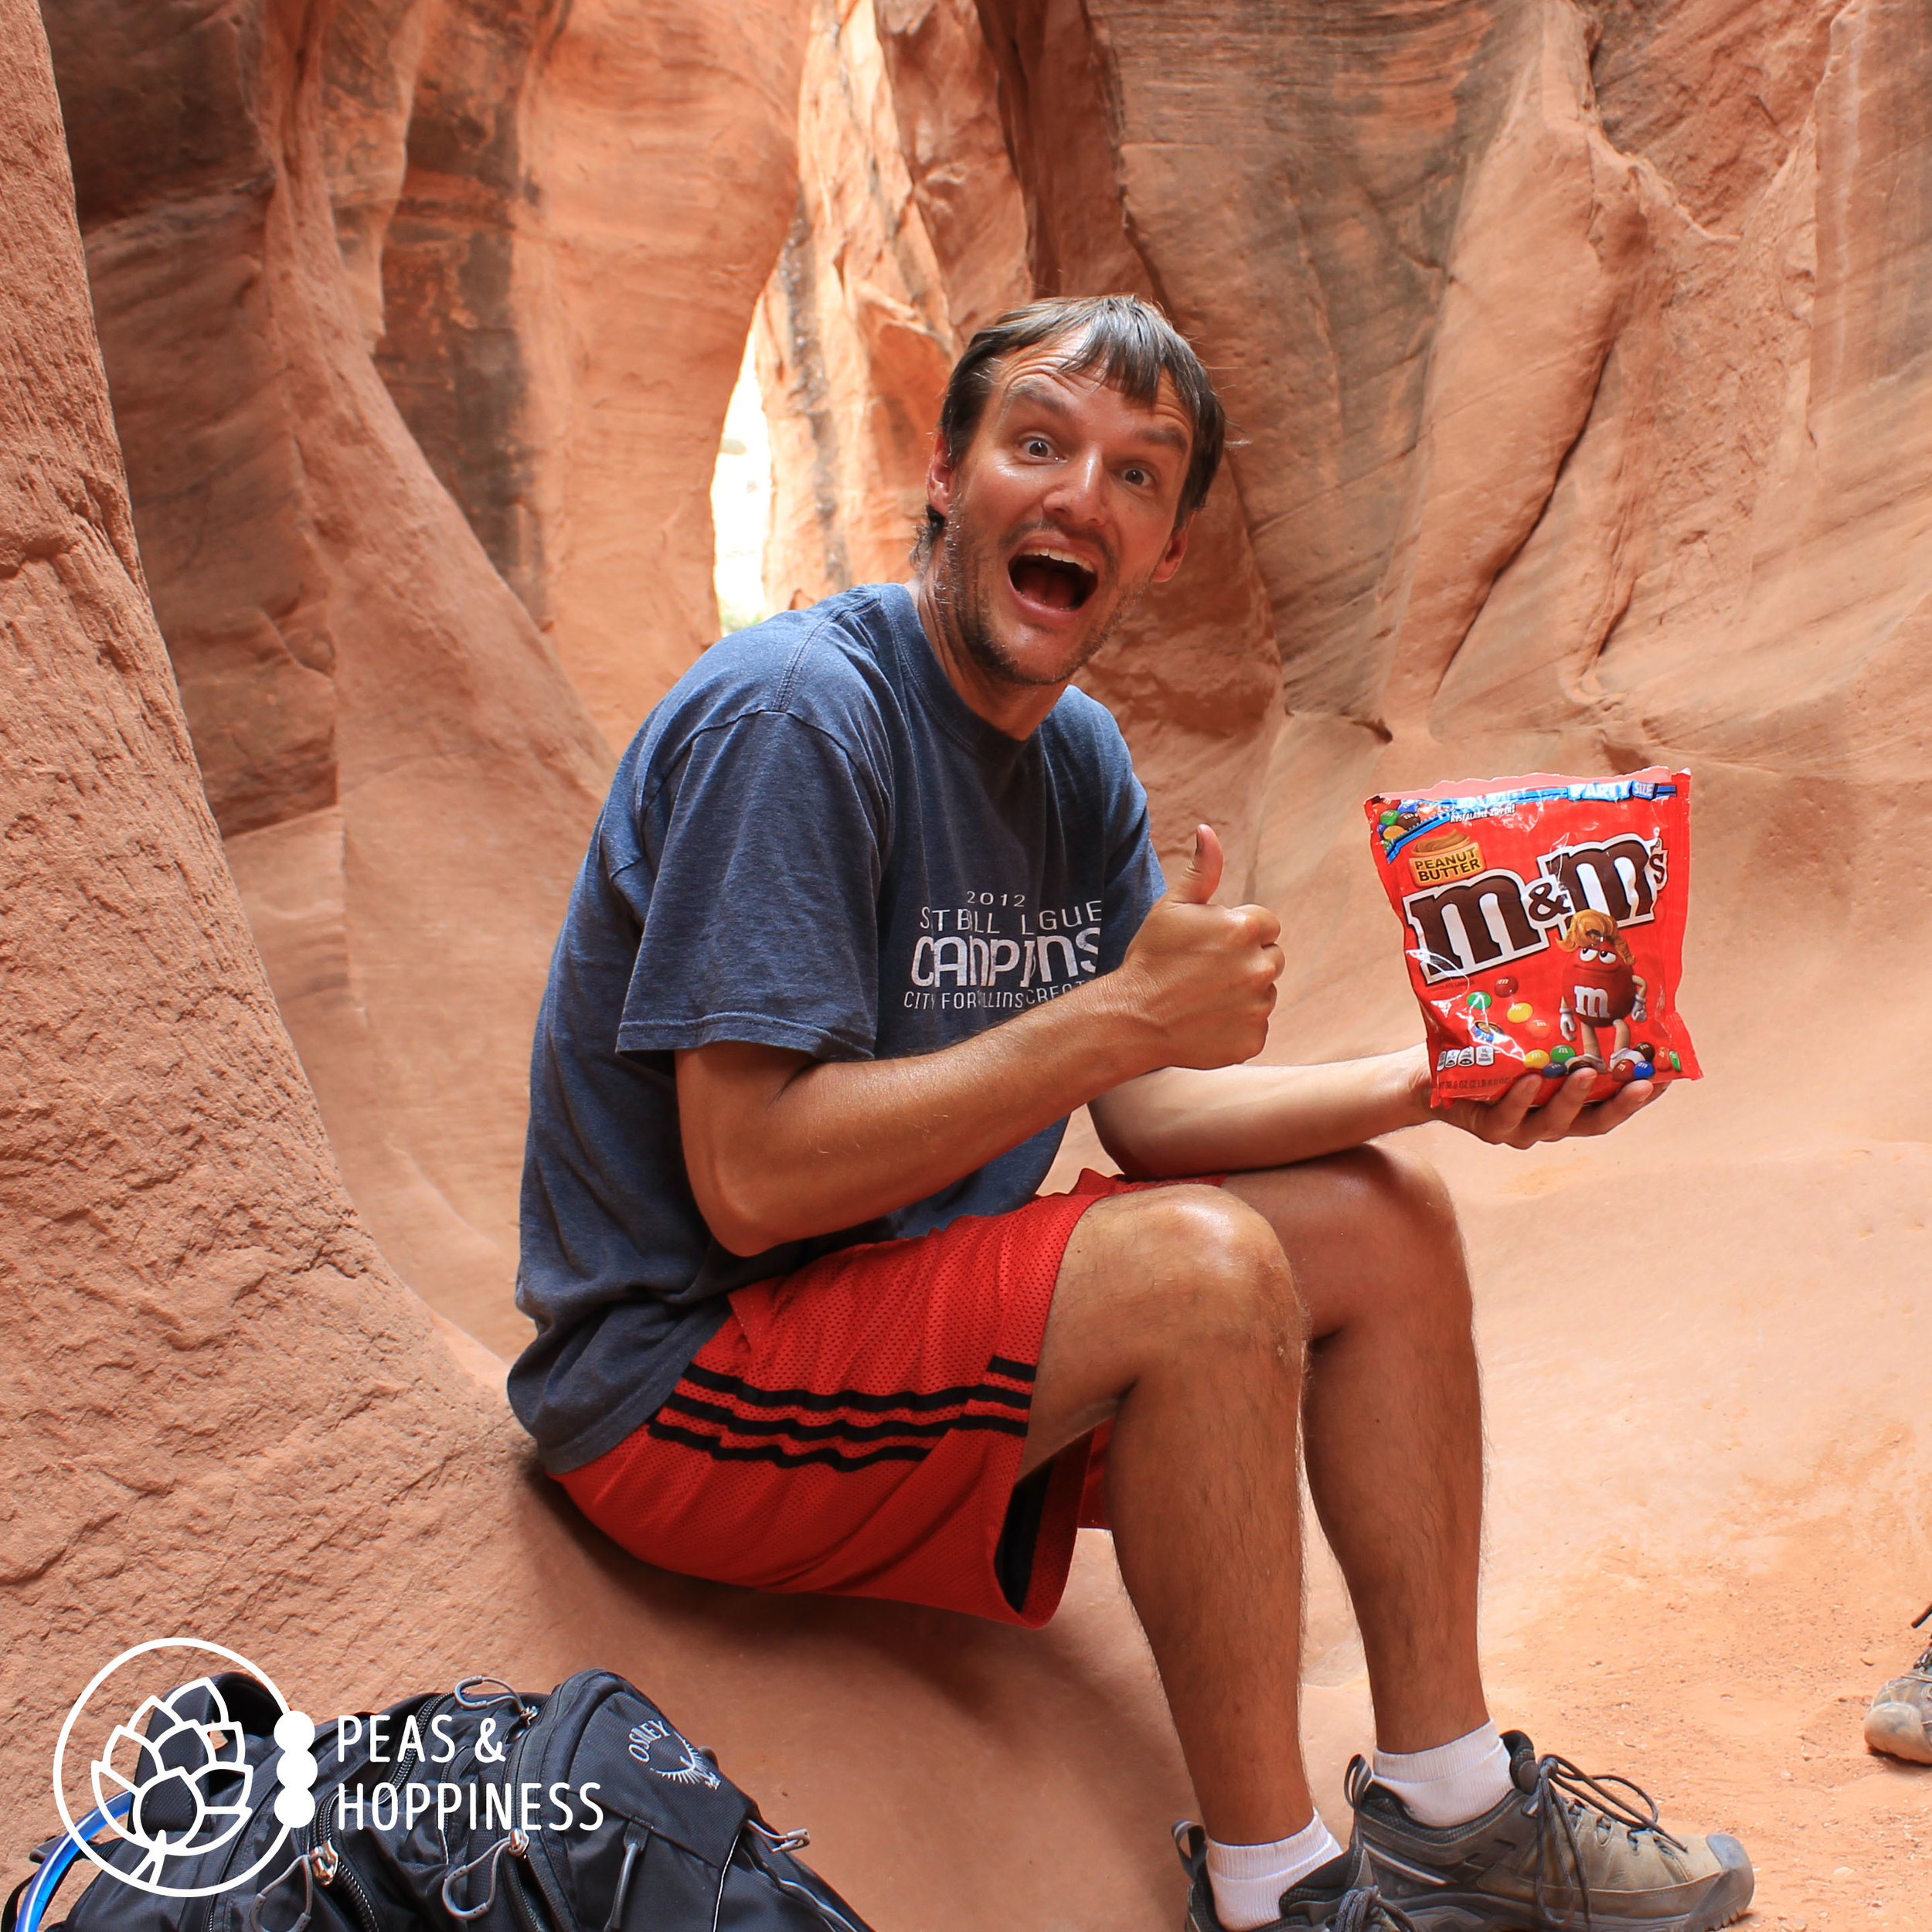 I'm not sure if he's delirious from the sun and lack of calories or if I'm finally rubbing off on him and he's really that excited about peanut butter M&amp;Ms! A tasty treat in the slot canyons